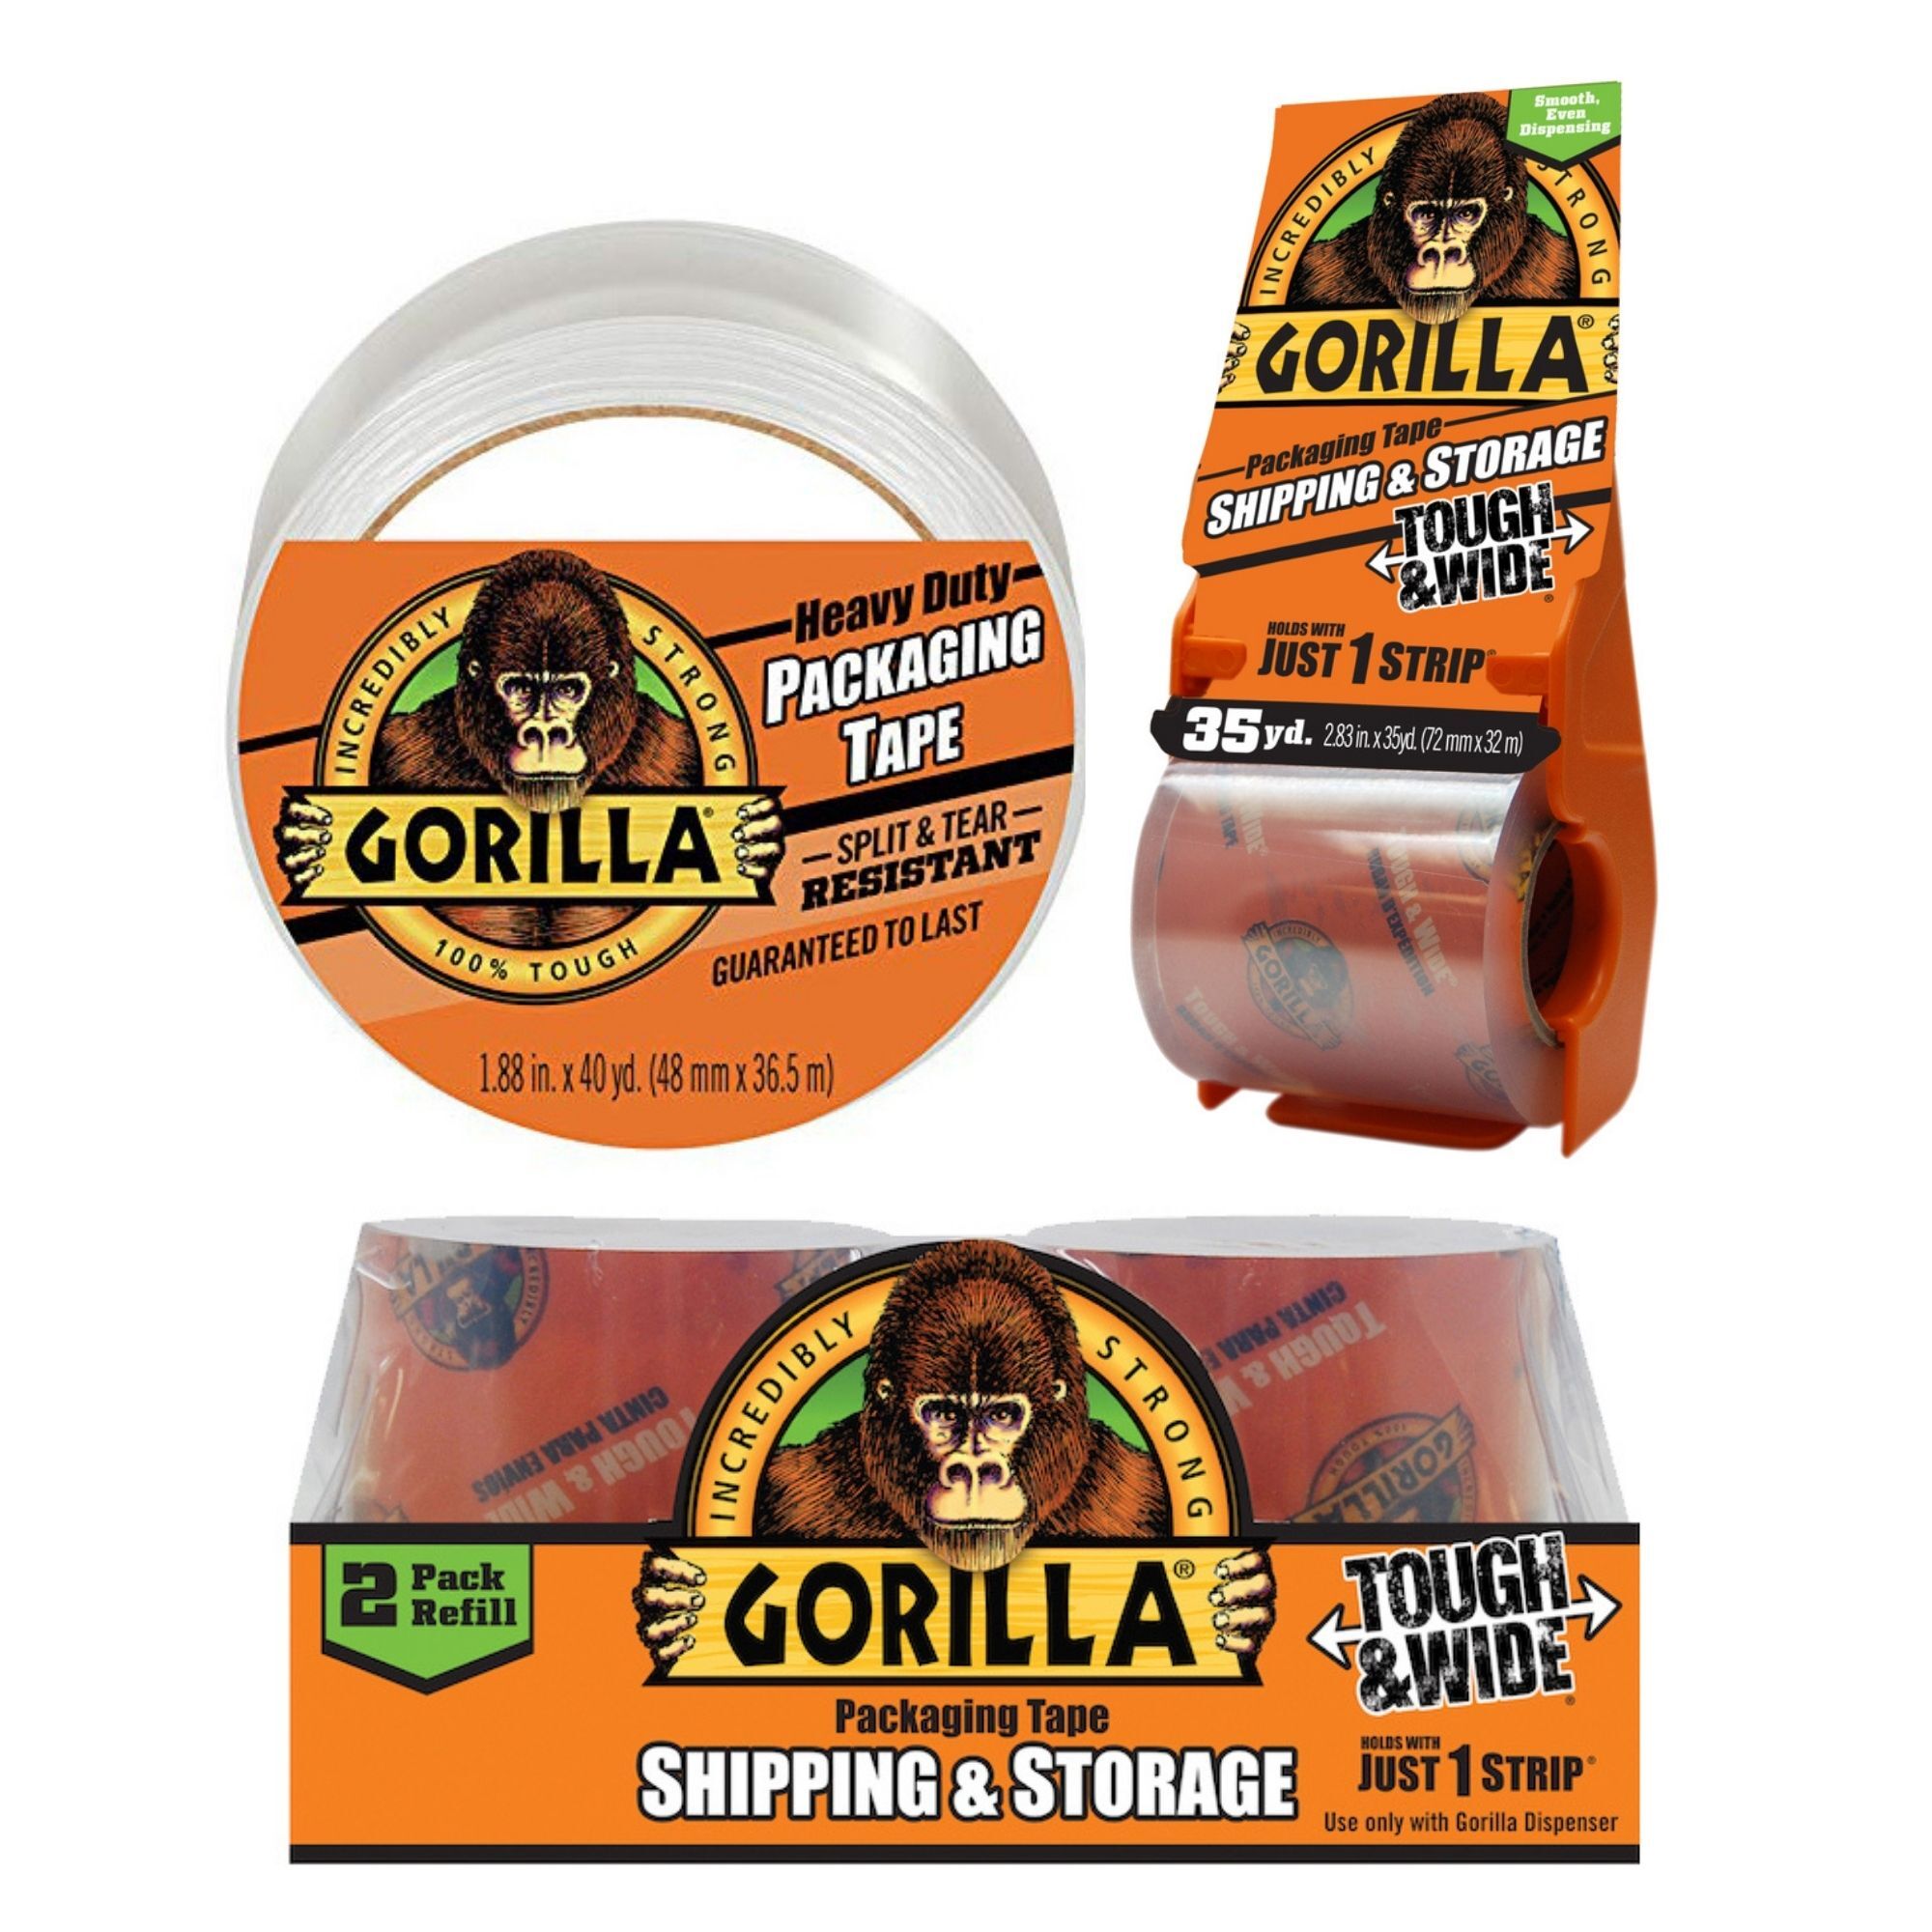 GORILLA Tough and Wide Packaging Tape 2.83-in x 105-ft Clear Packing Tape New 